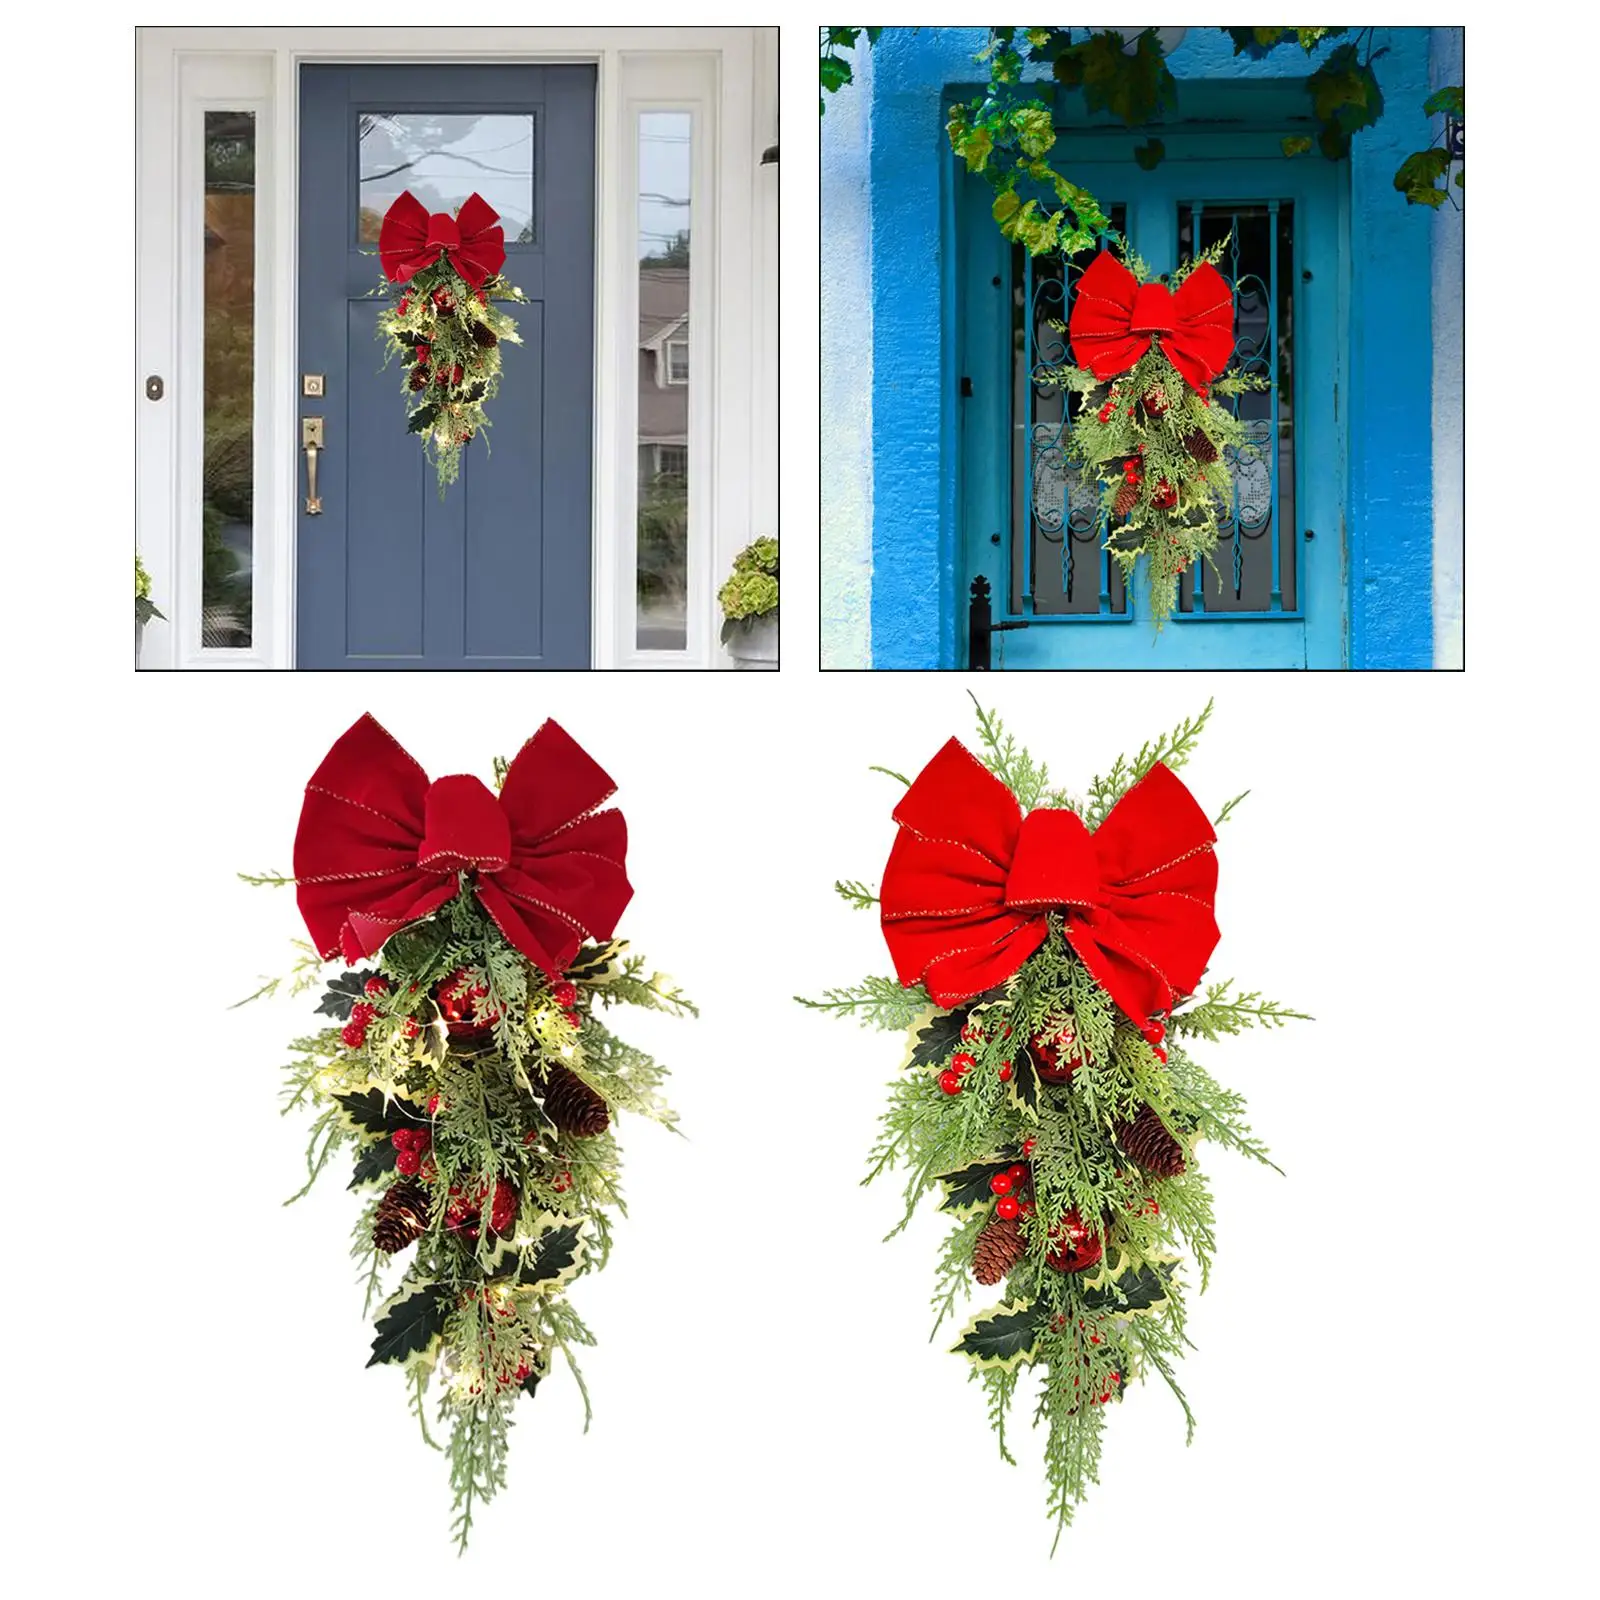 Christmas Wreath Indoor Outdoor Red Berries Housewarming Green Leaves Xmas Wreath for Living Room Wall Fireplace Hotel Bedroom